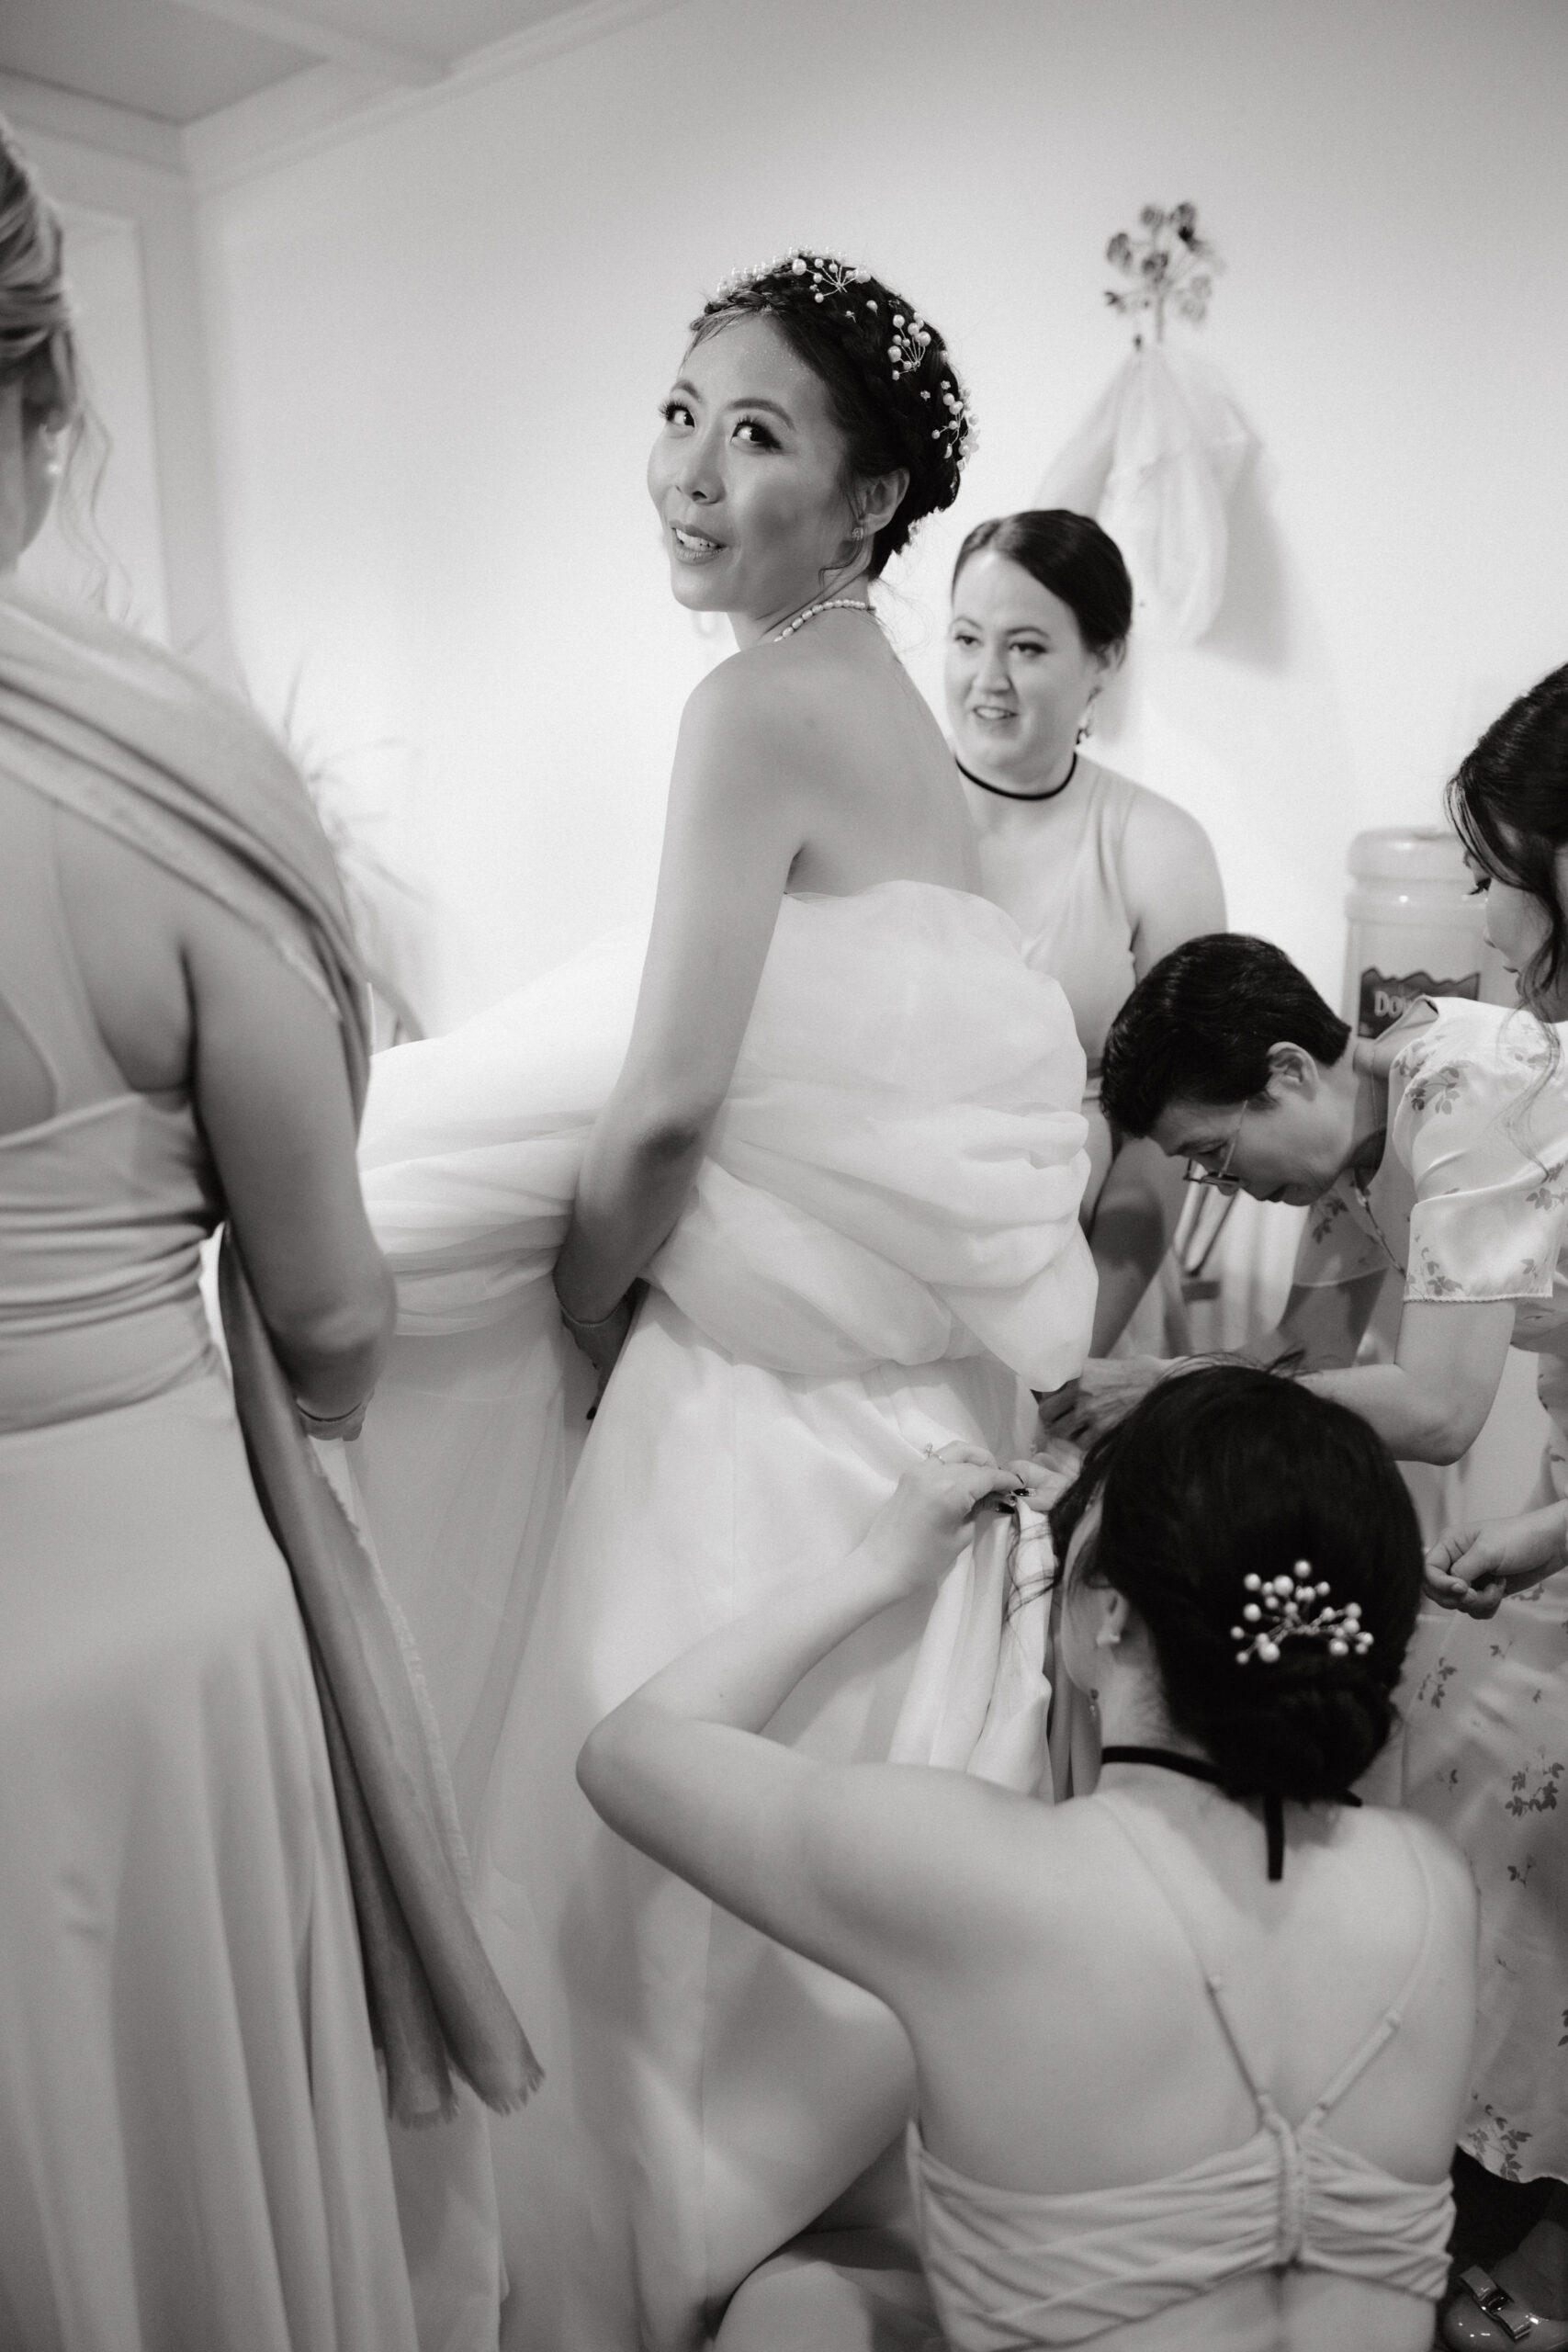 The mother of the bride and the bridesmaids are fixing the bride's wedding dress. Image by Jenny Fu Studio